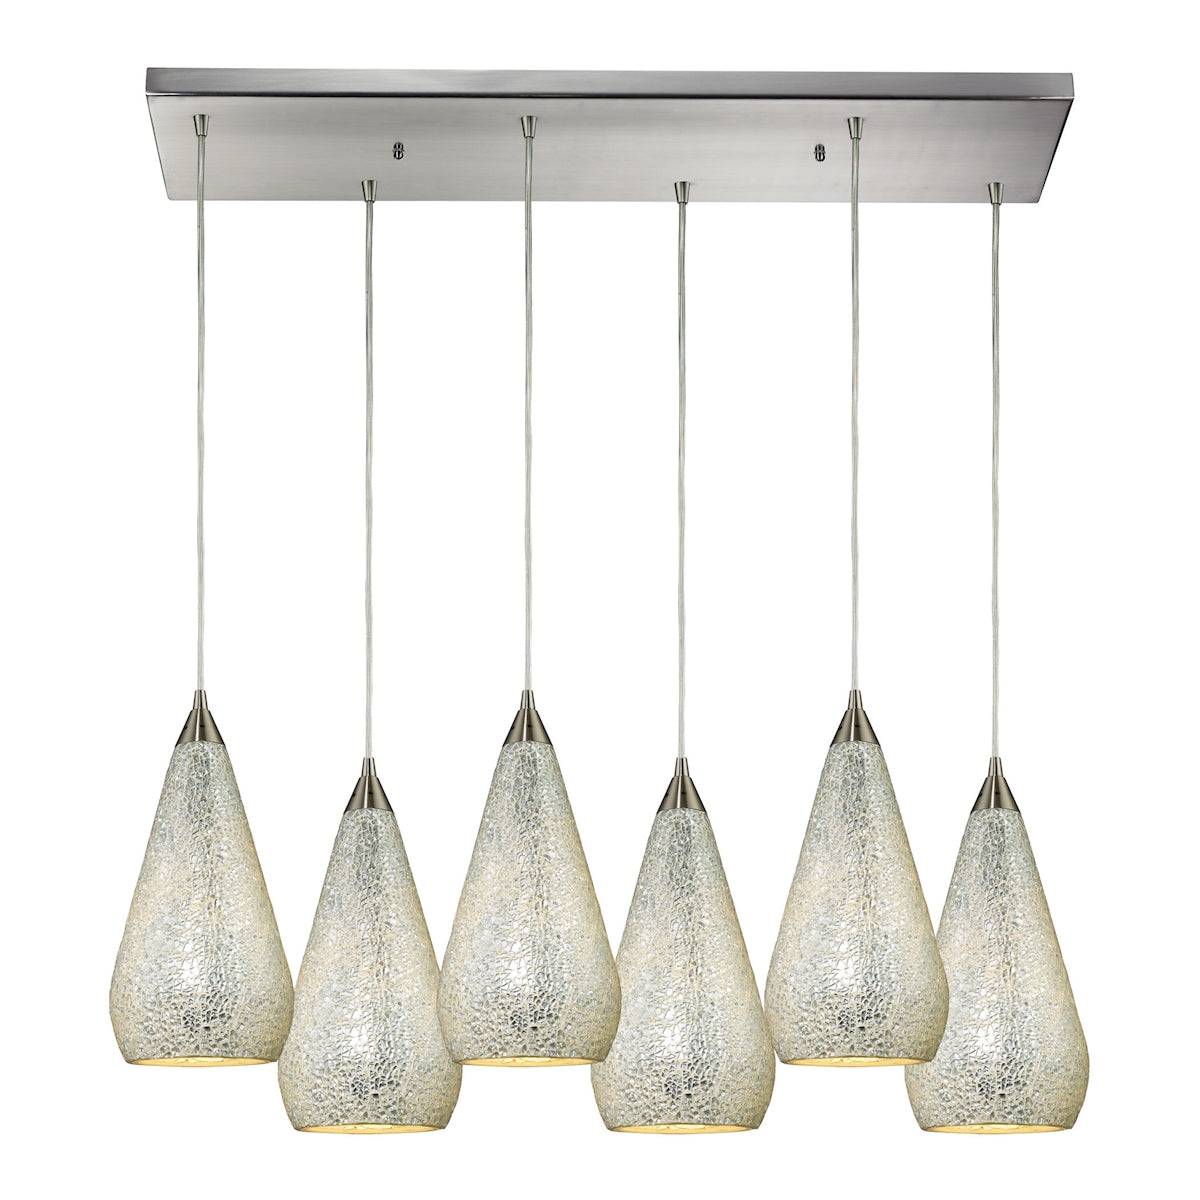 ELK Lighting 546-6RC-SLV-CRC Curvalo 6-Light Rectangular Pendant Fixture in Satin Nickel with Silver Crackle Glass